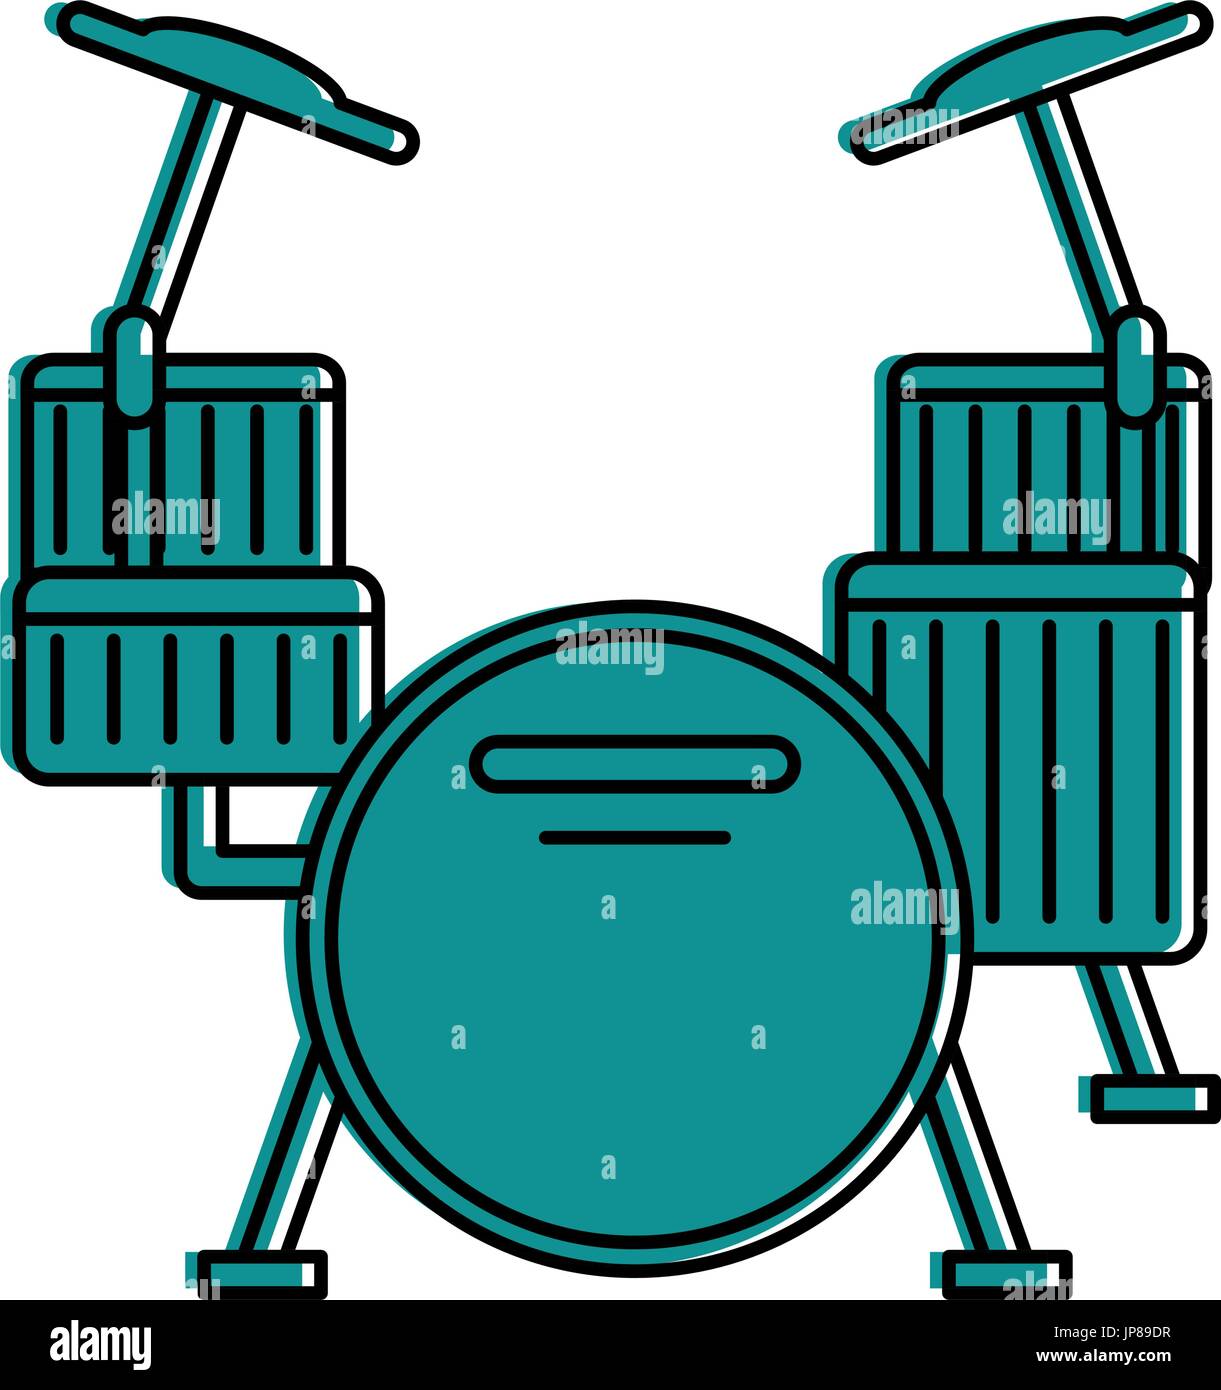 drum set musical instrument icon image Stock Vector